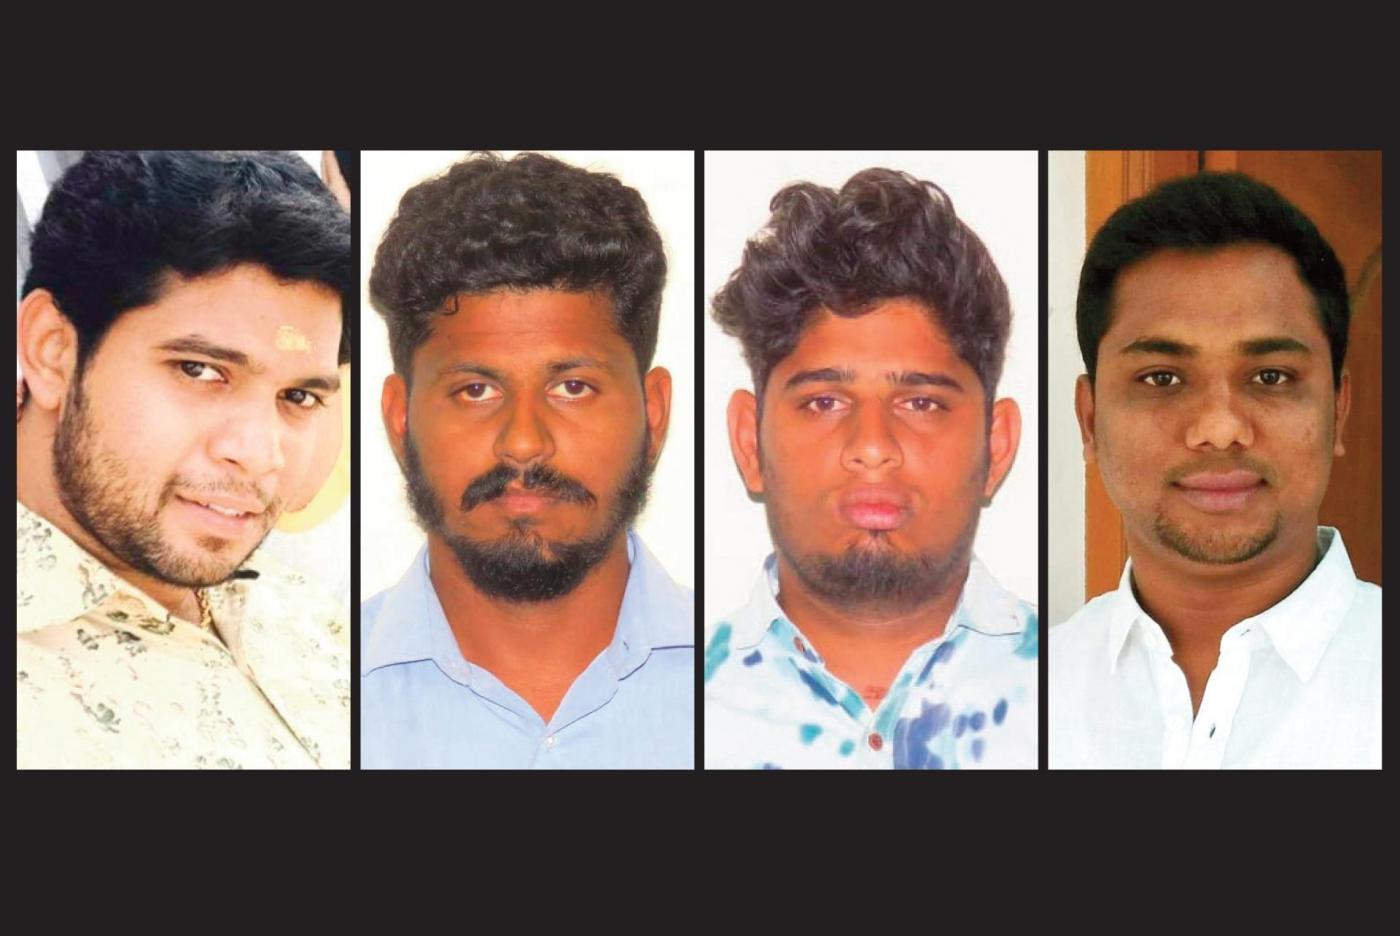 Thirunavukkarasu, Sabarirajan, Vasanthakumar and Satish - the four youths who were arrested in connection with the sexual assault of young girls in Pollachi, Tamil Nadu. (File Photo: IANS) by .